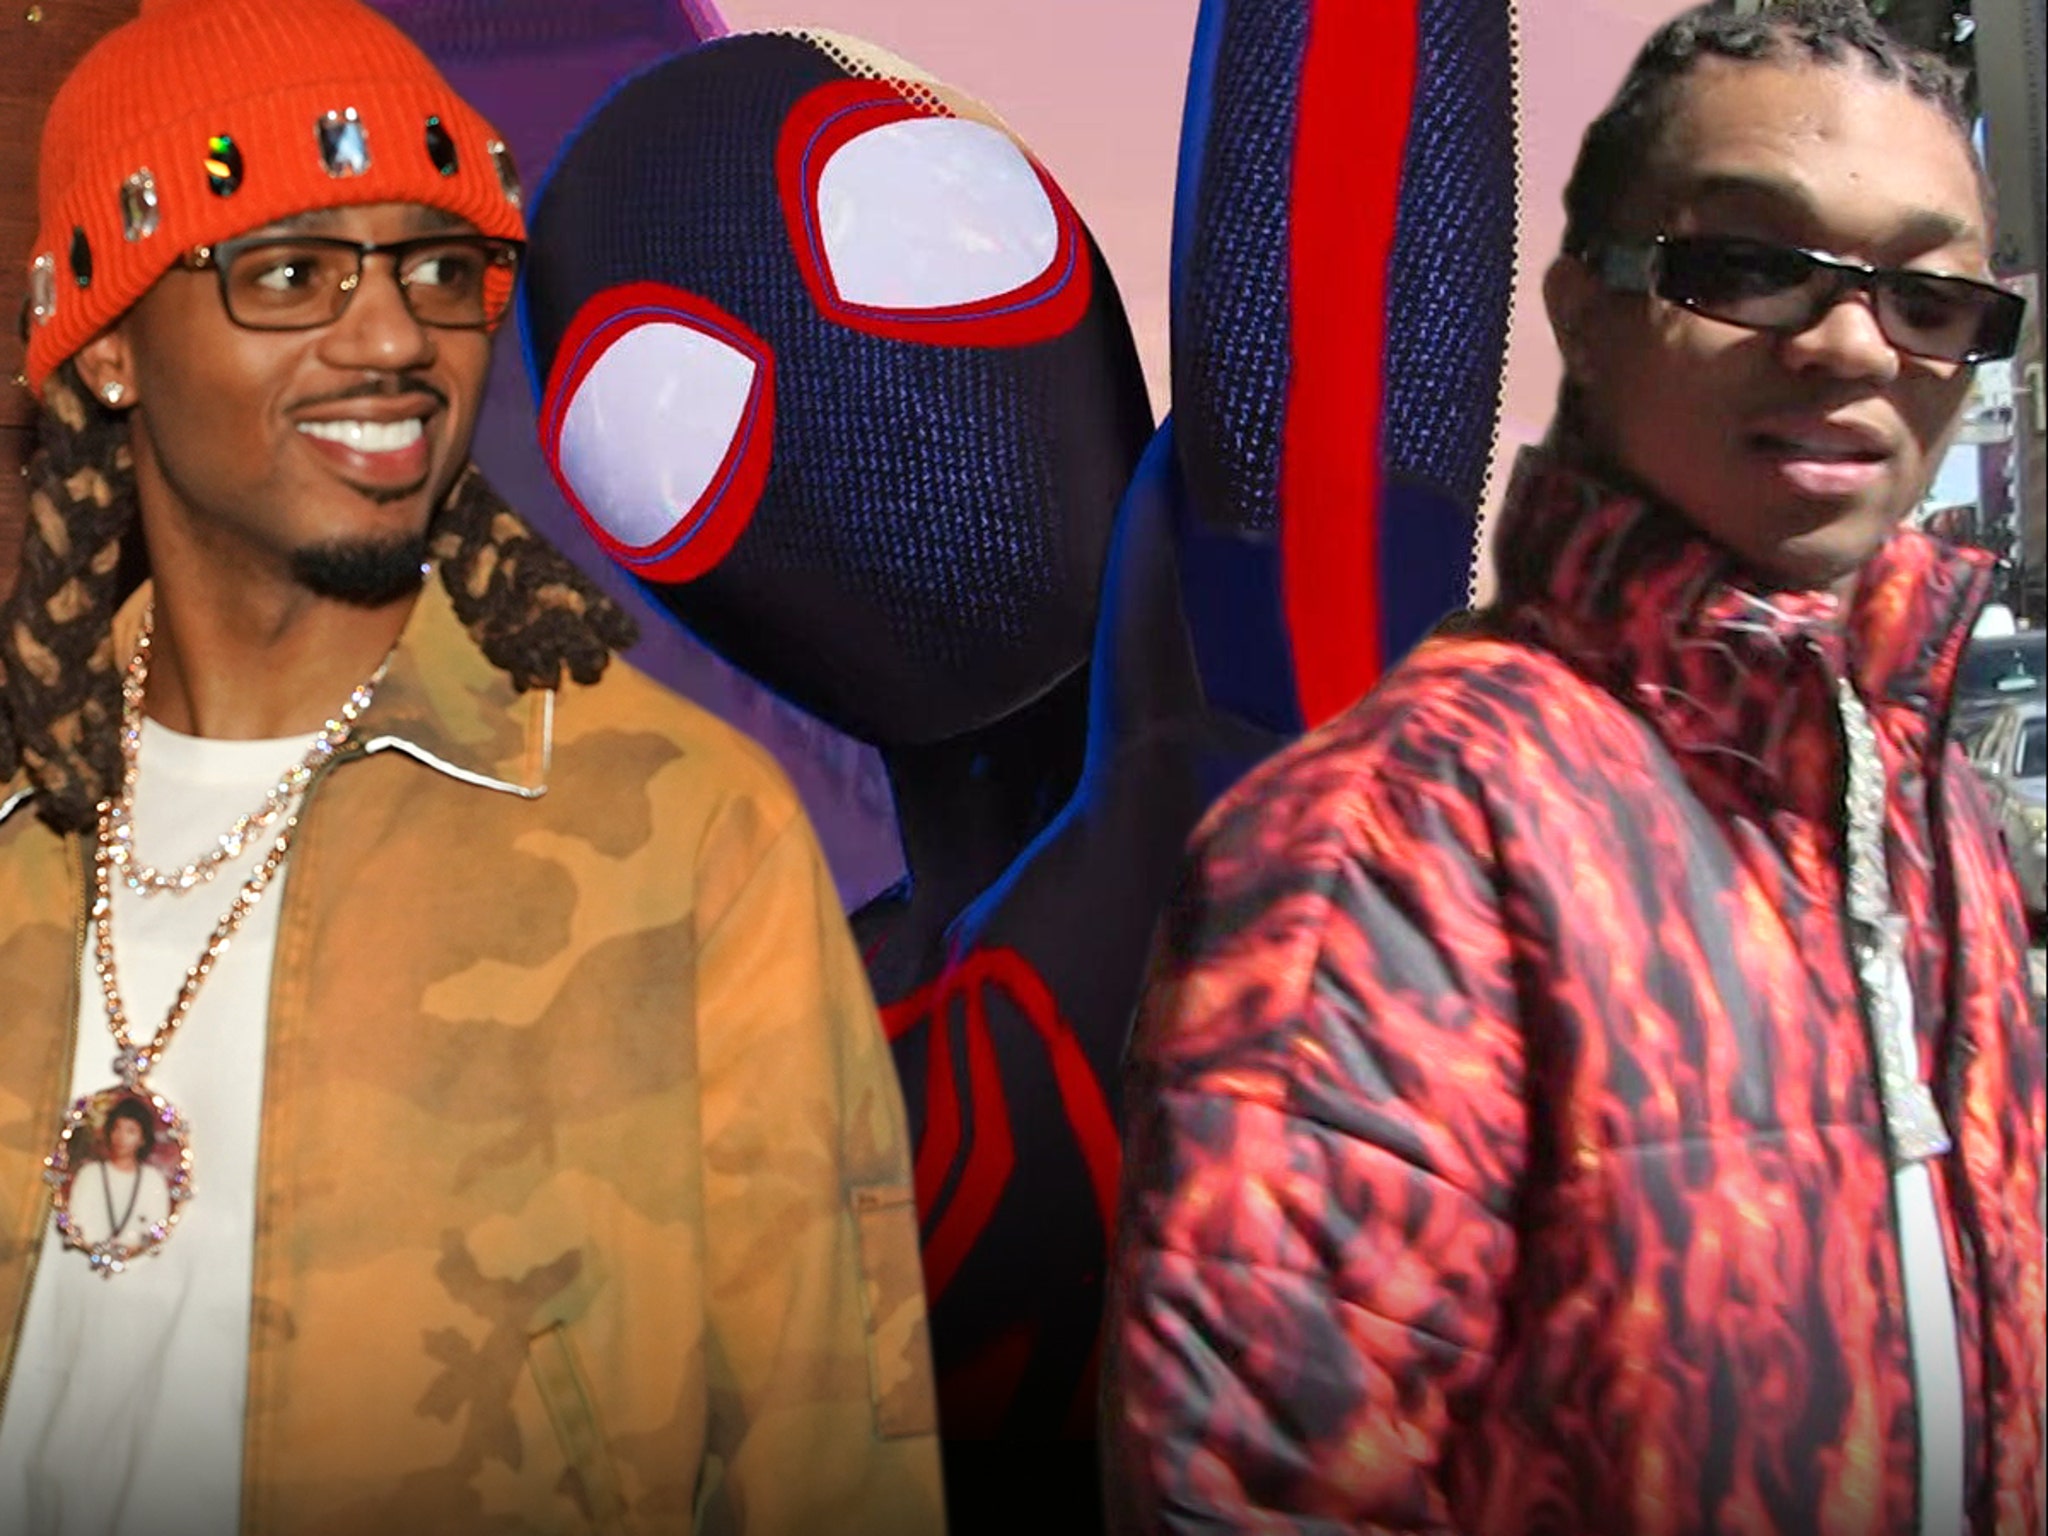 Metro Boomin is behind 'Spider-Man Across the Spider-Verse' music